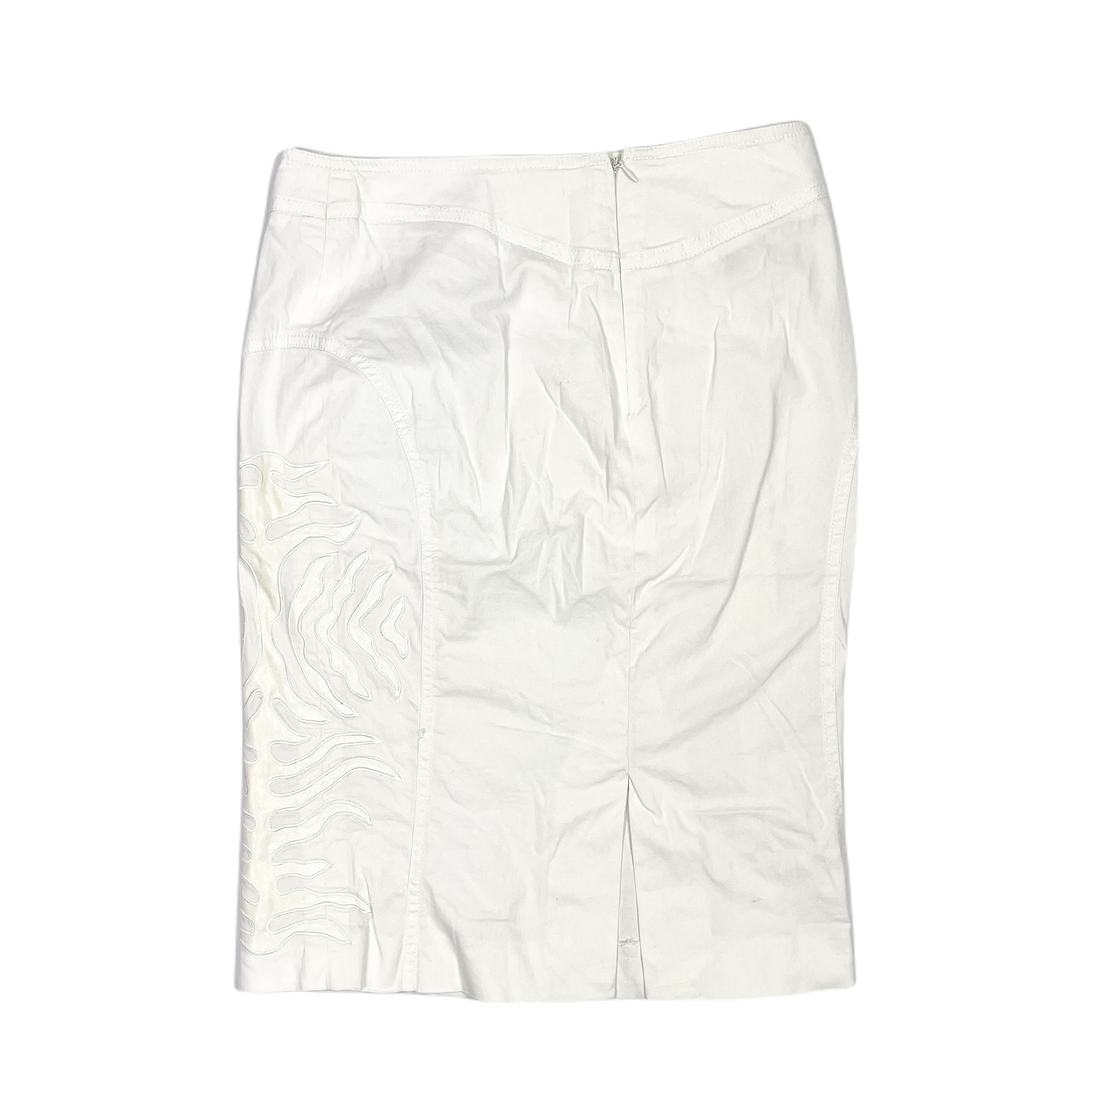 Only By Thierry Mugler White Flames Skirt 1990's